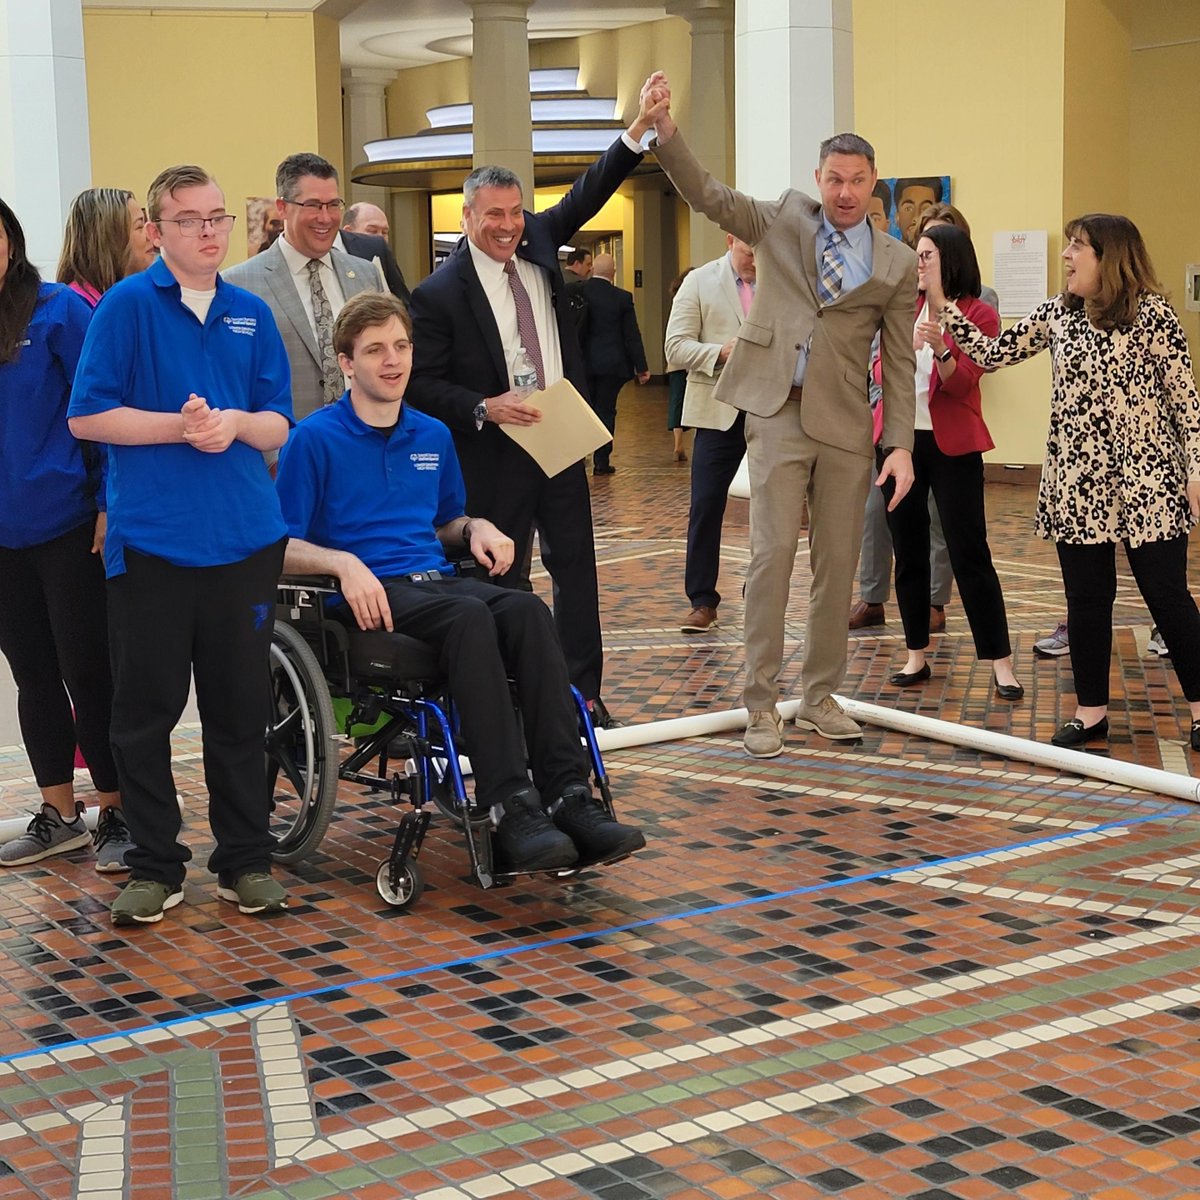 Special Olympics PA was in the Capitol this week and I promised them last weekend that I would stop by for a round of bocce. I'm going to stick to basketball as my sport, but I had a great time connecting again with these athletes. Proud to support such a great organization!